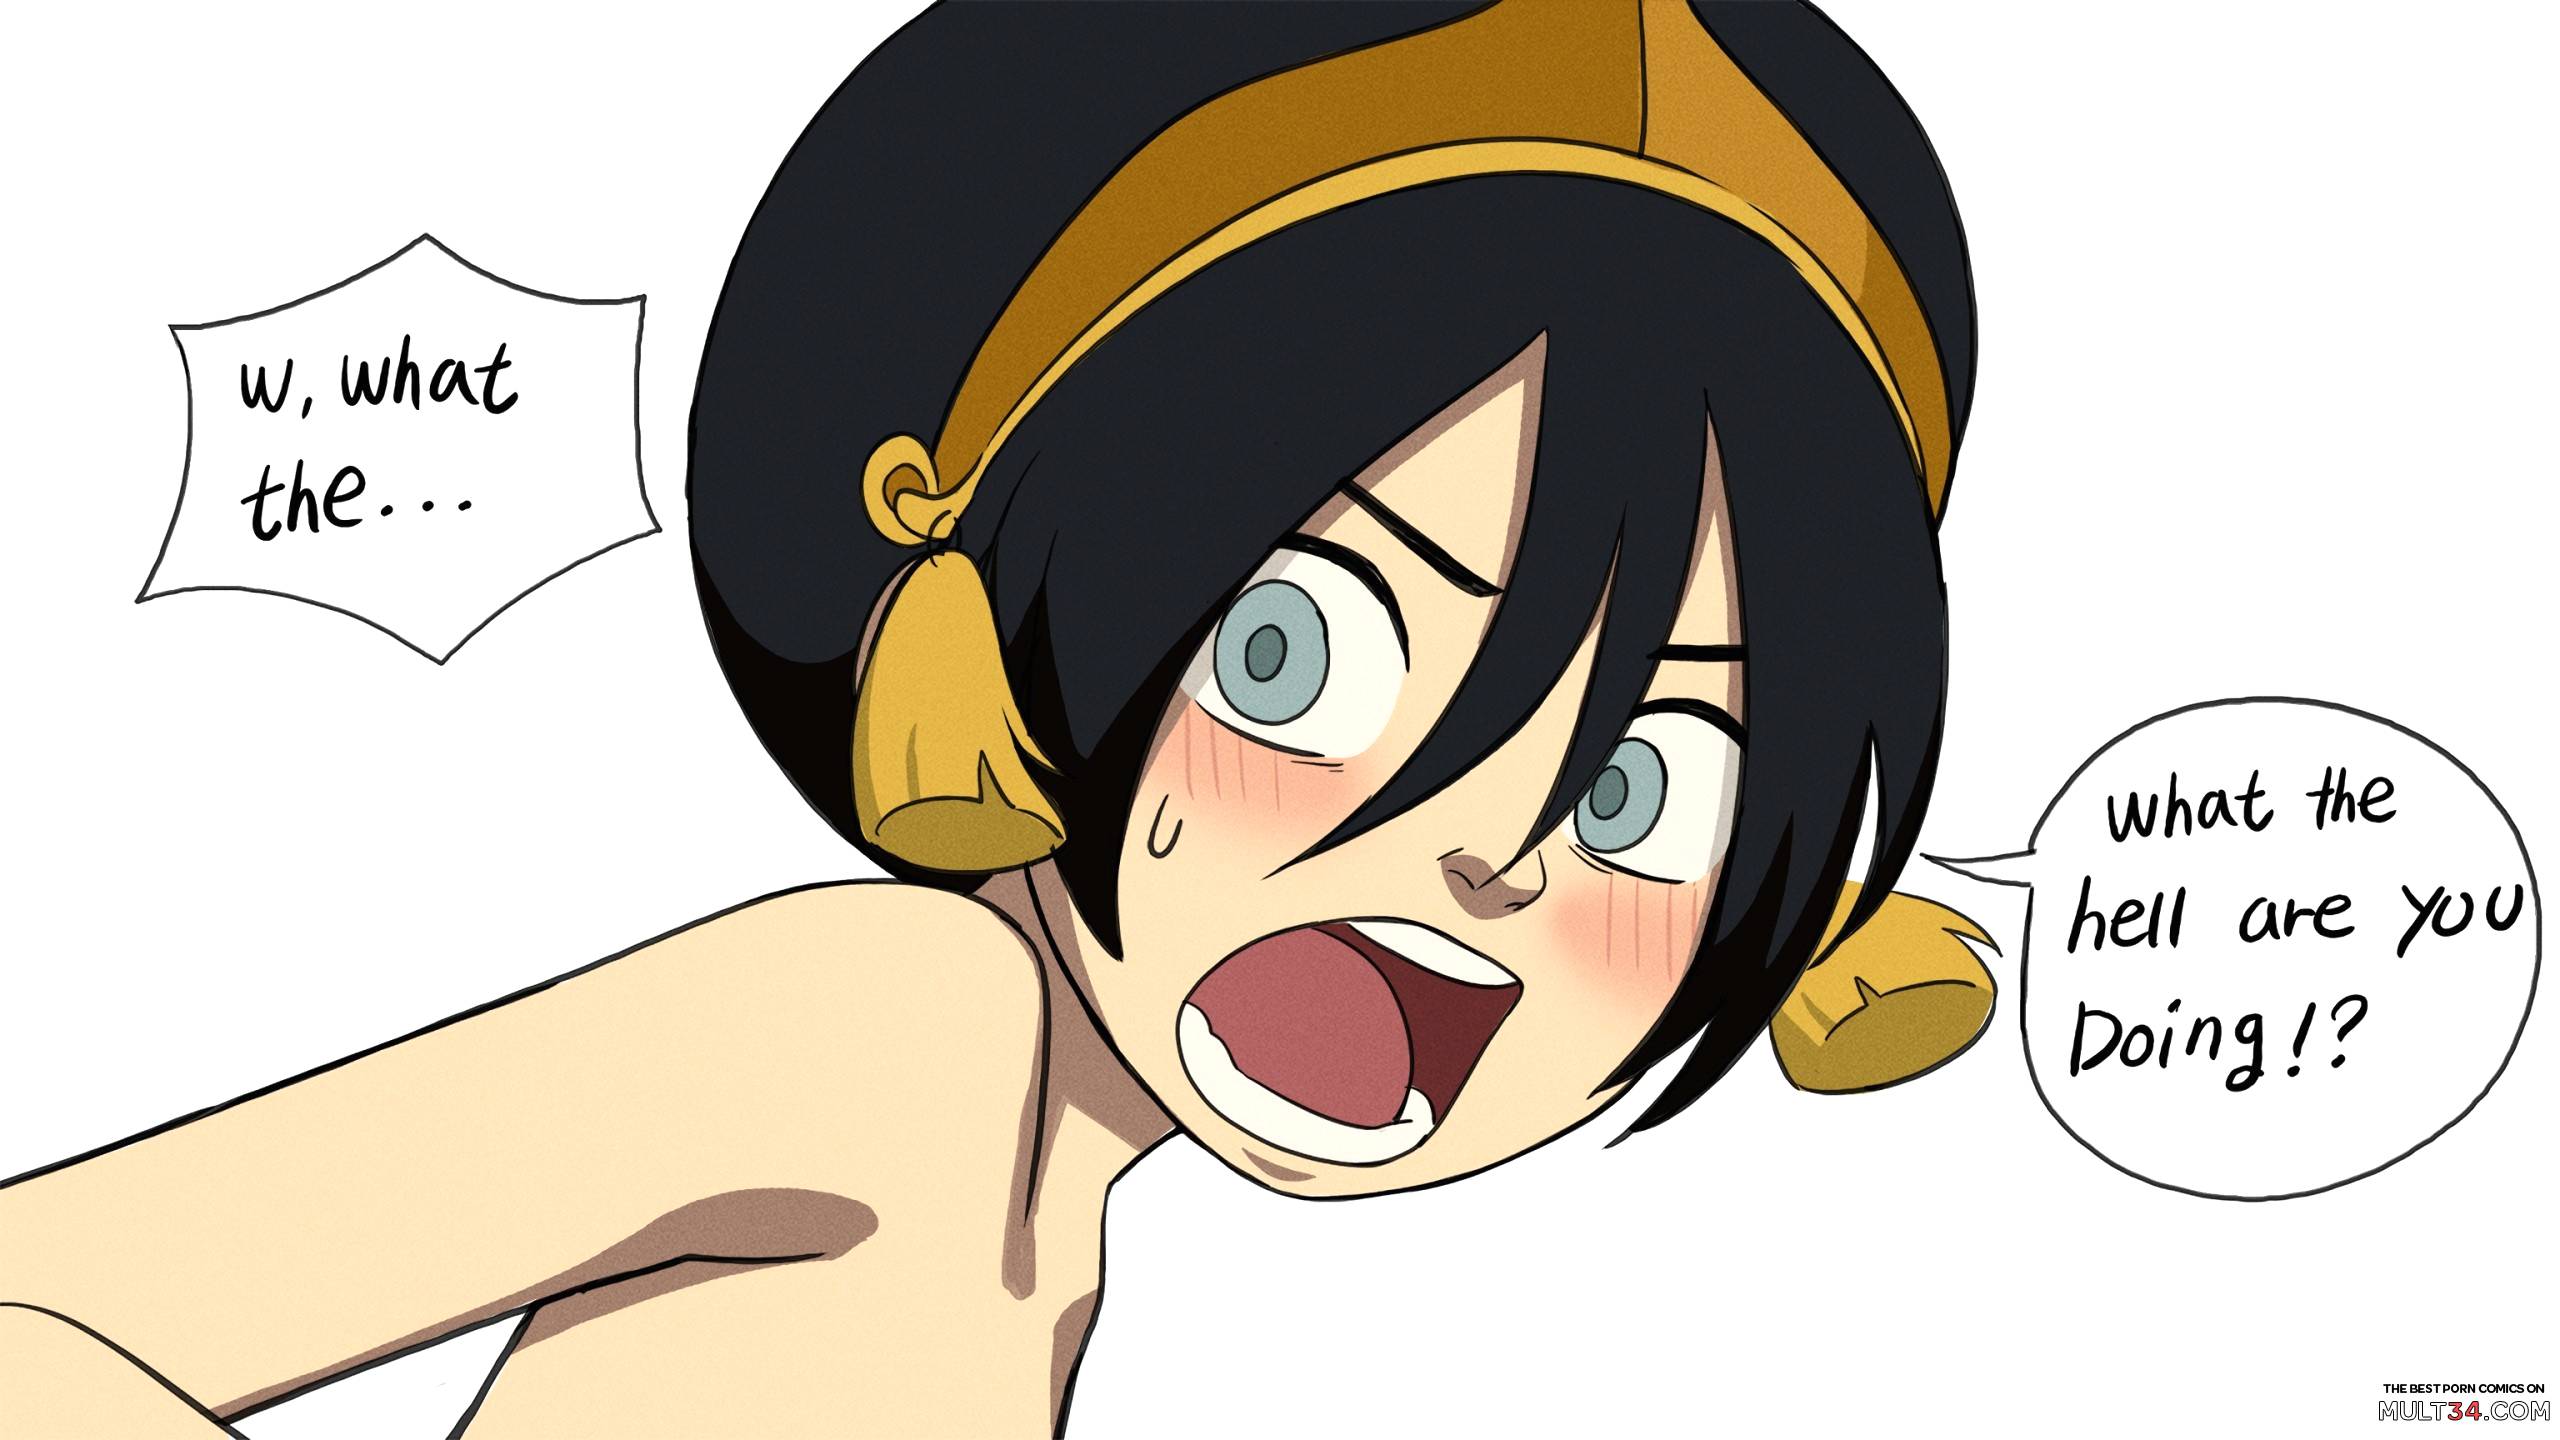 Toph Beifong page 10